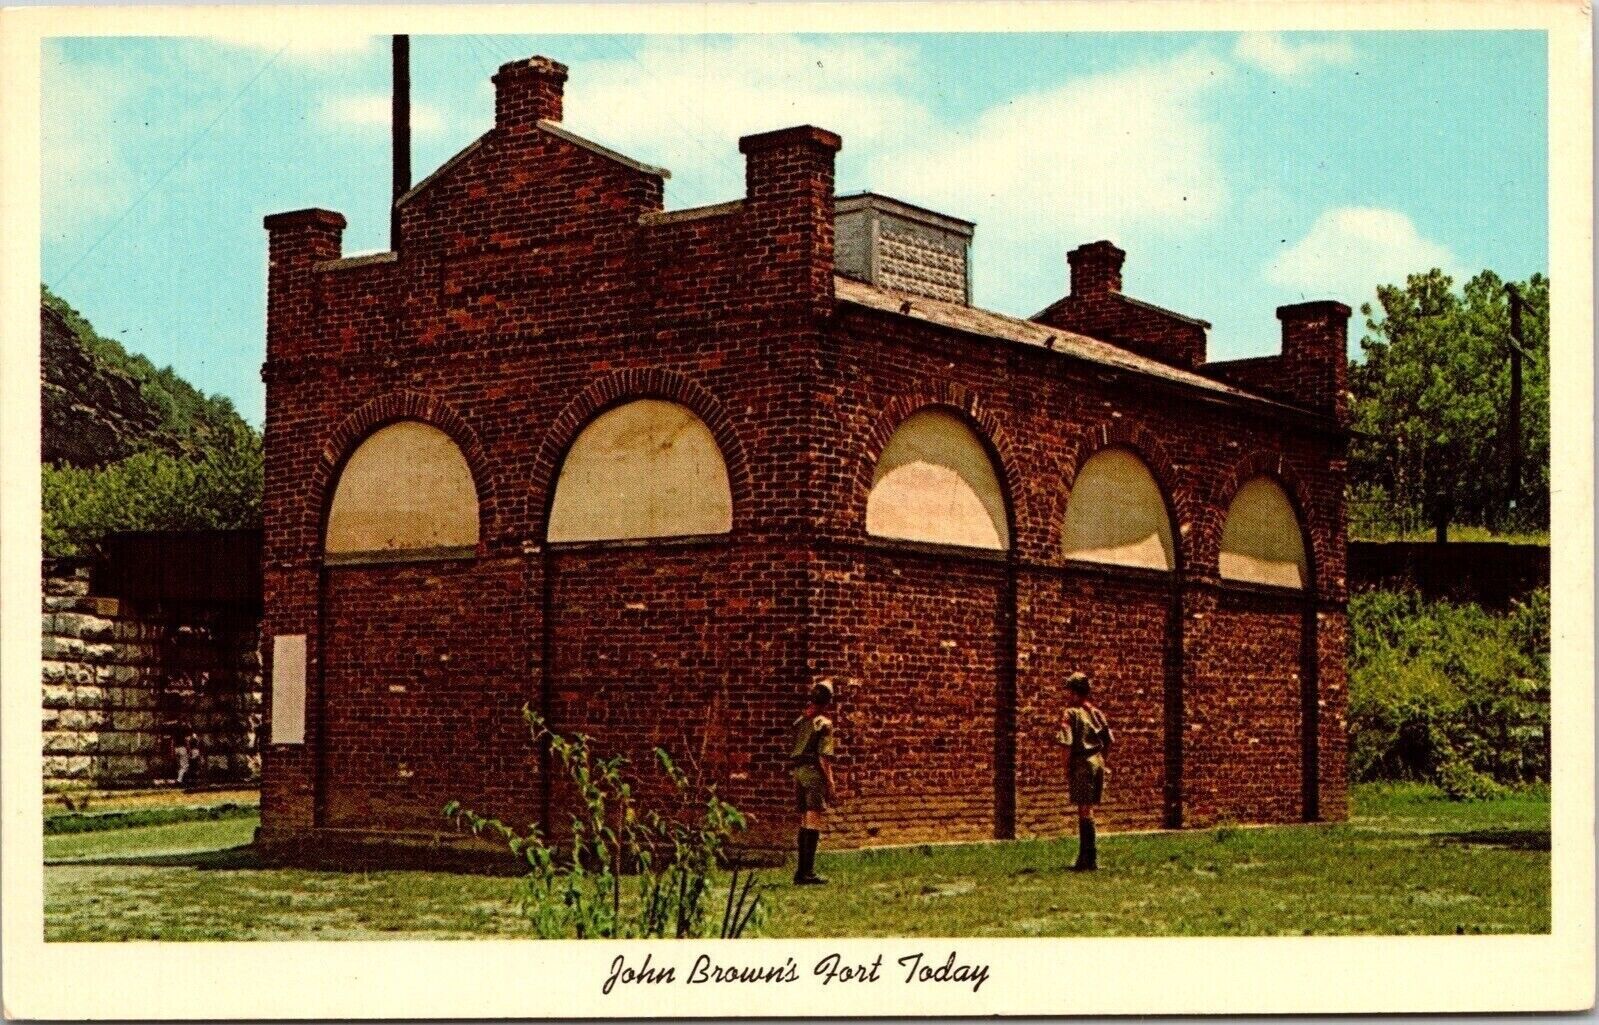 Historic John Brown Fort Today Brick Fire Engine House Visitors Postcard Unused